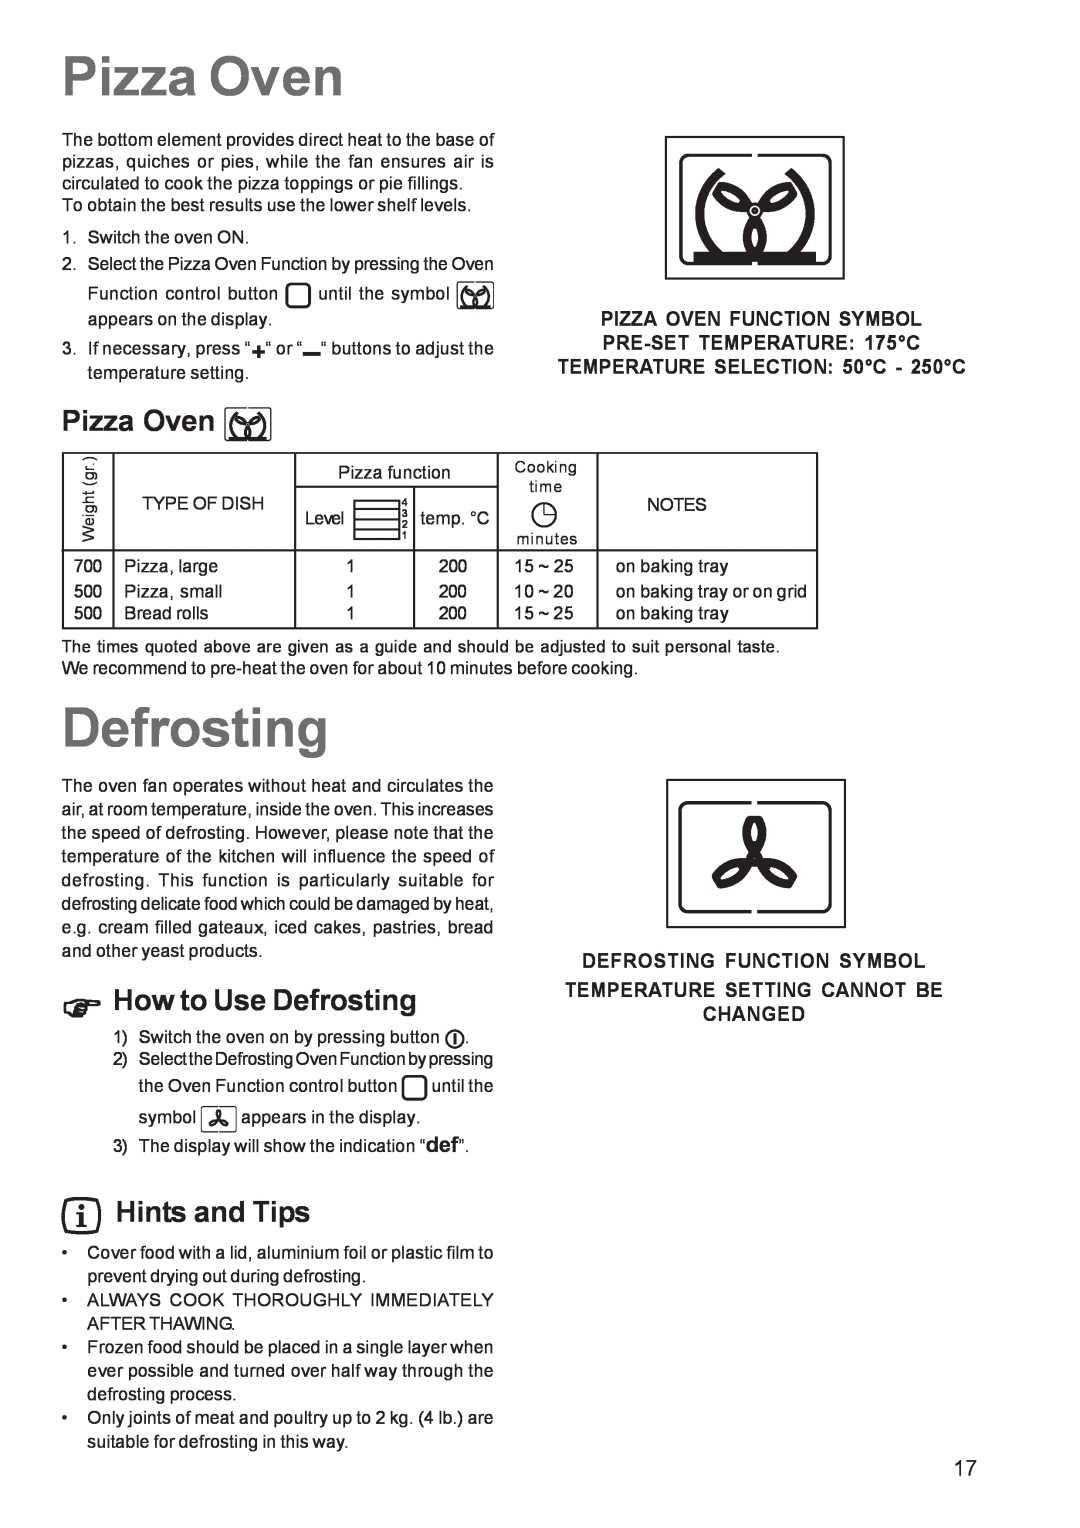 Zanussi ZOB 1060 Pizza Oven, How to Use Defrosting, Defrosting Function Symbol, Temperature Setting Cannot Be Changed 